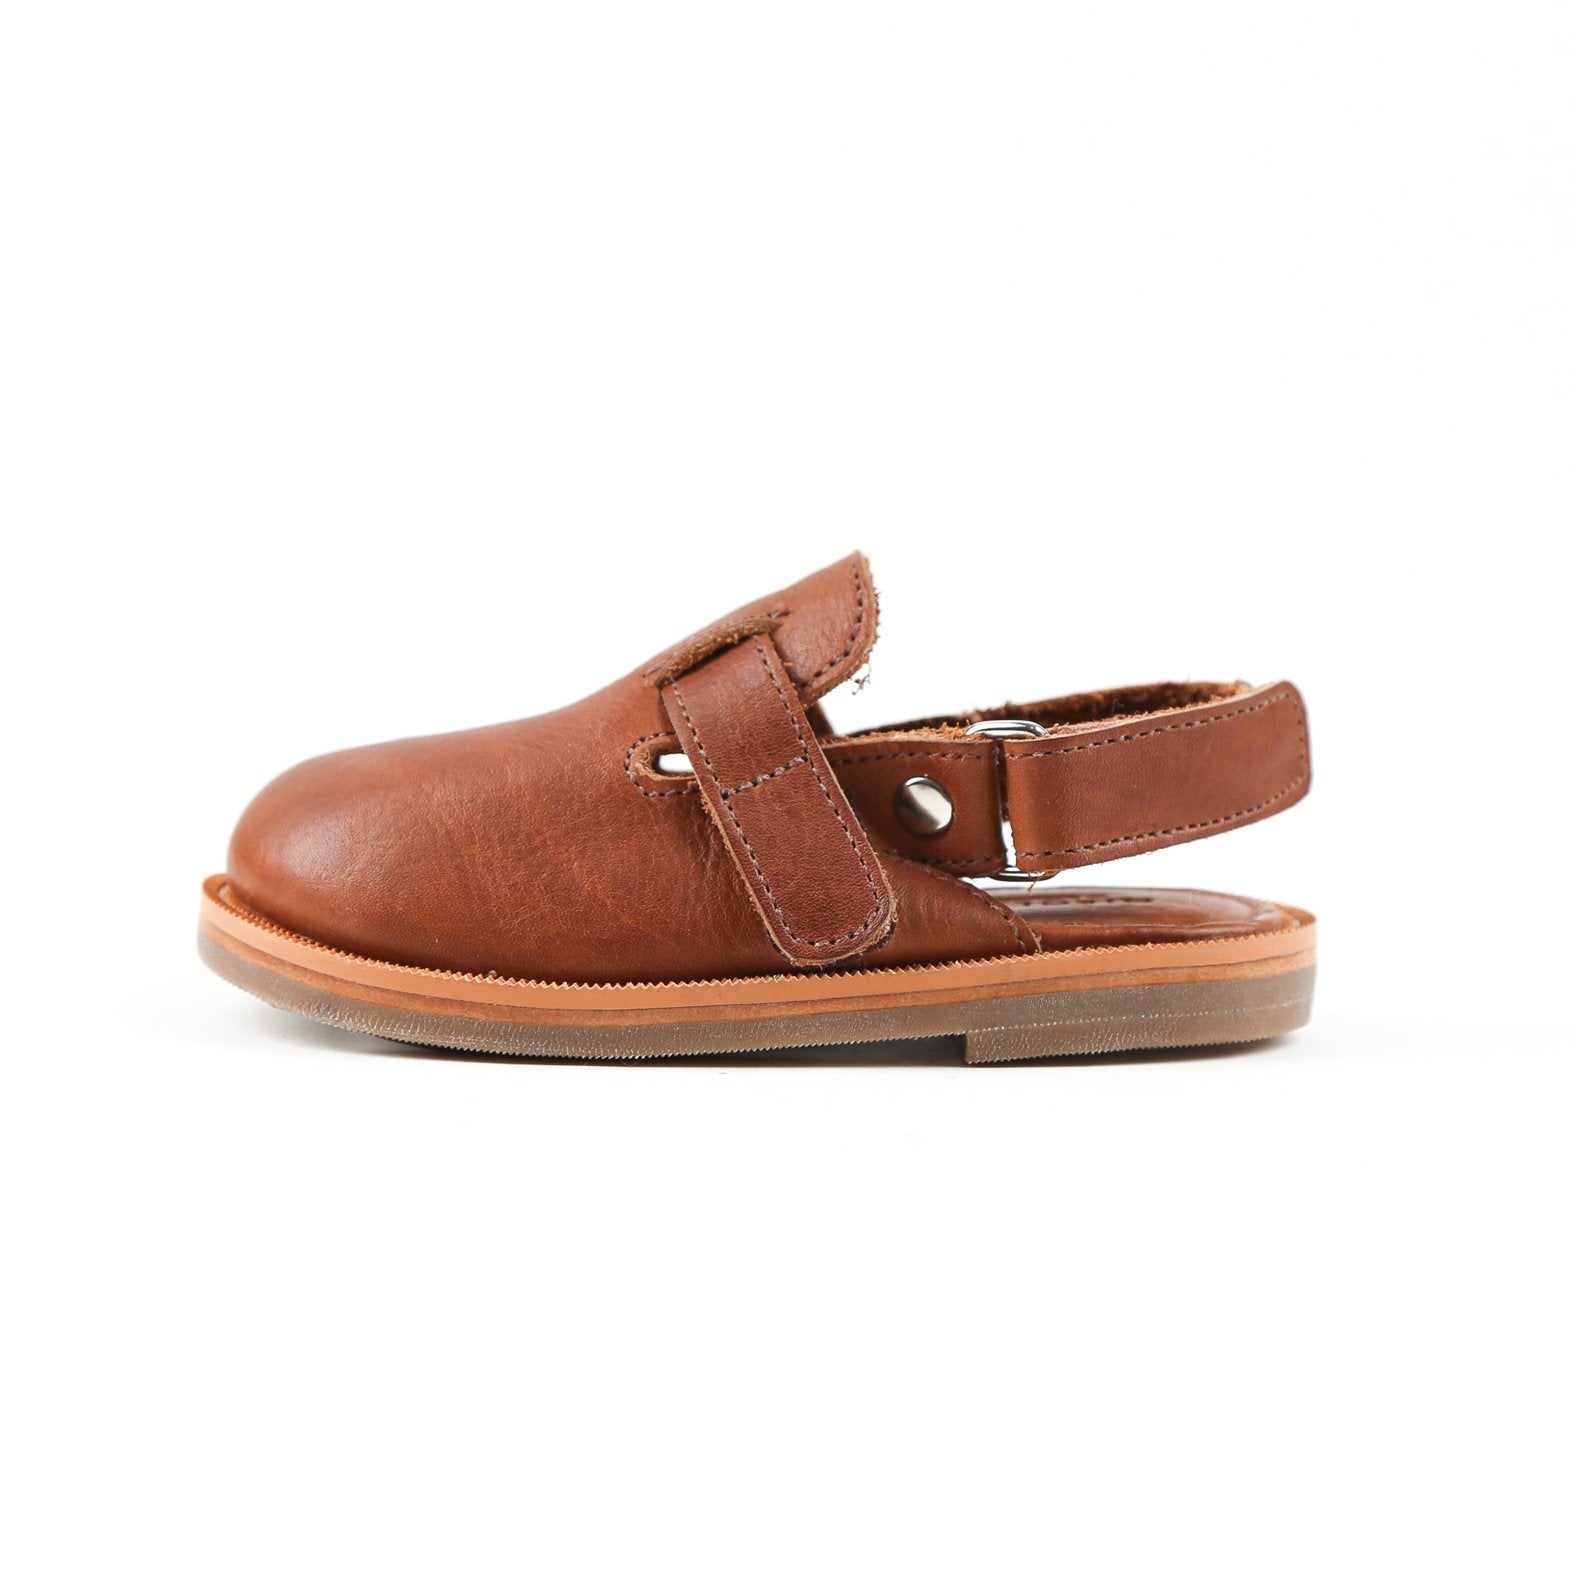 MK2046 - Explorer Sandals Velcro Brown | Sustainable Fashion made by ...